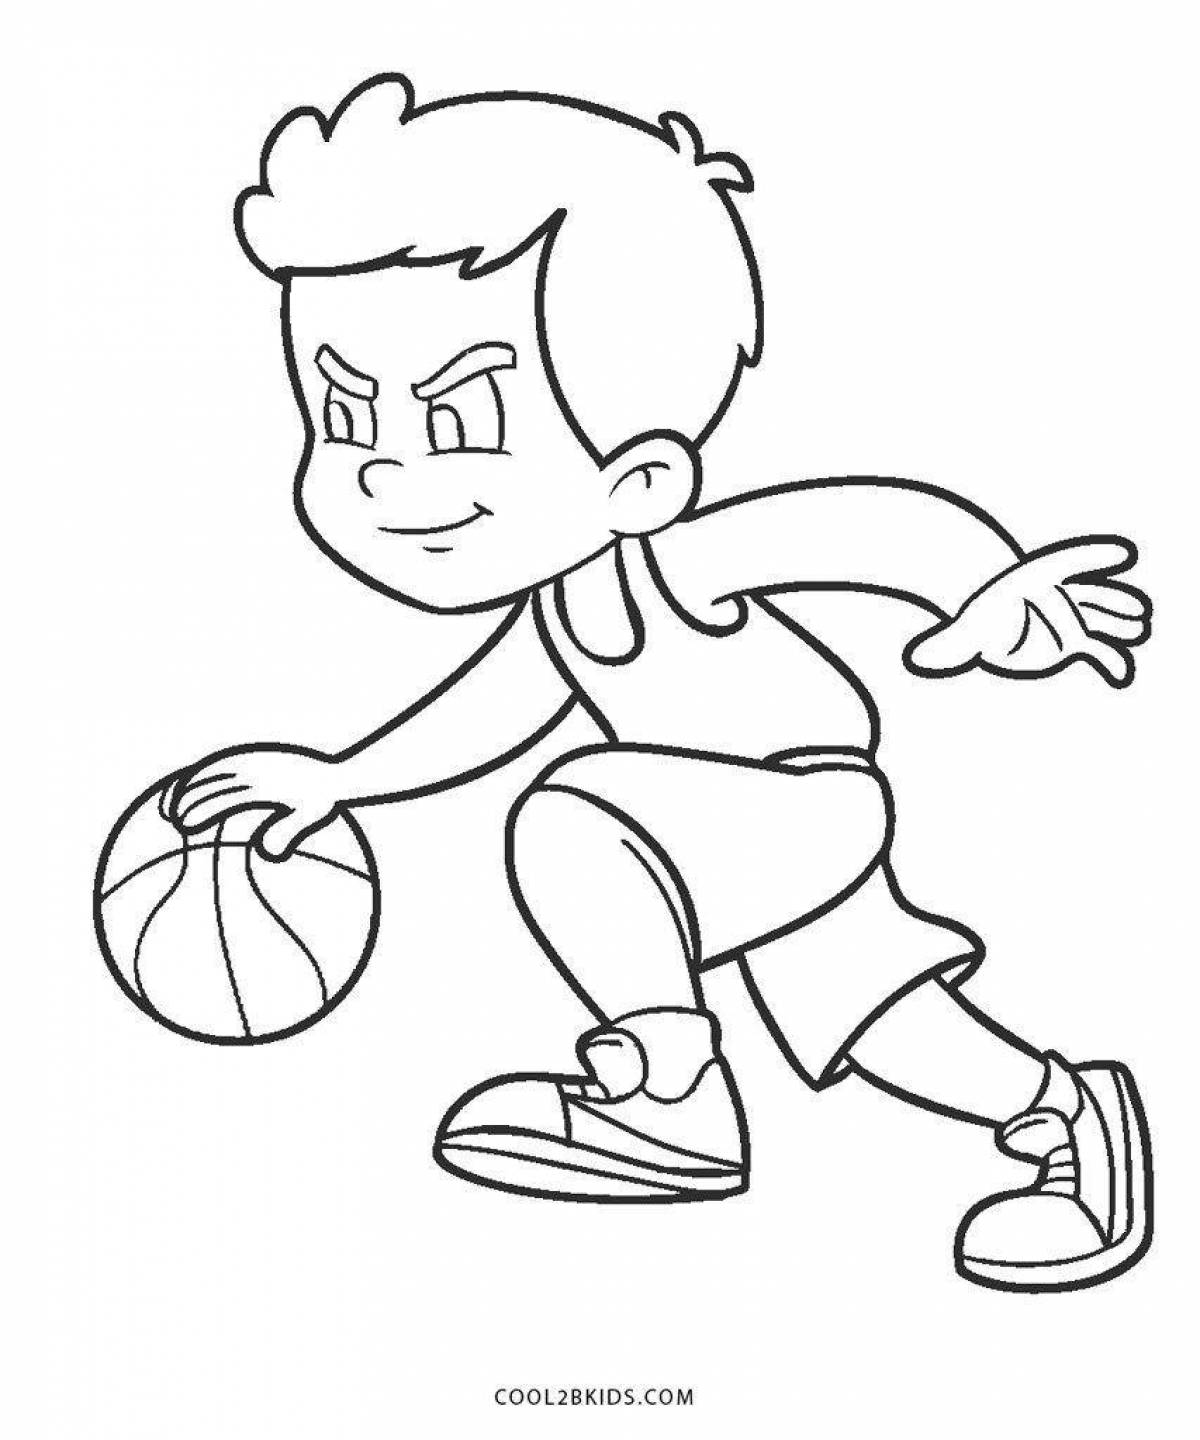 Adorable sports coloring book for kids